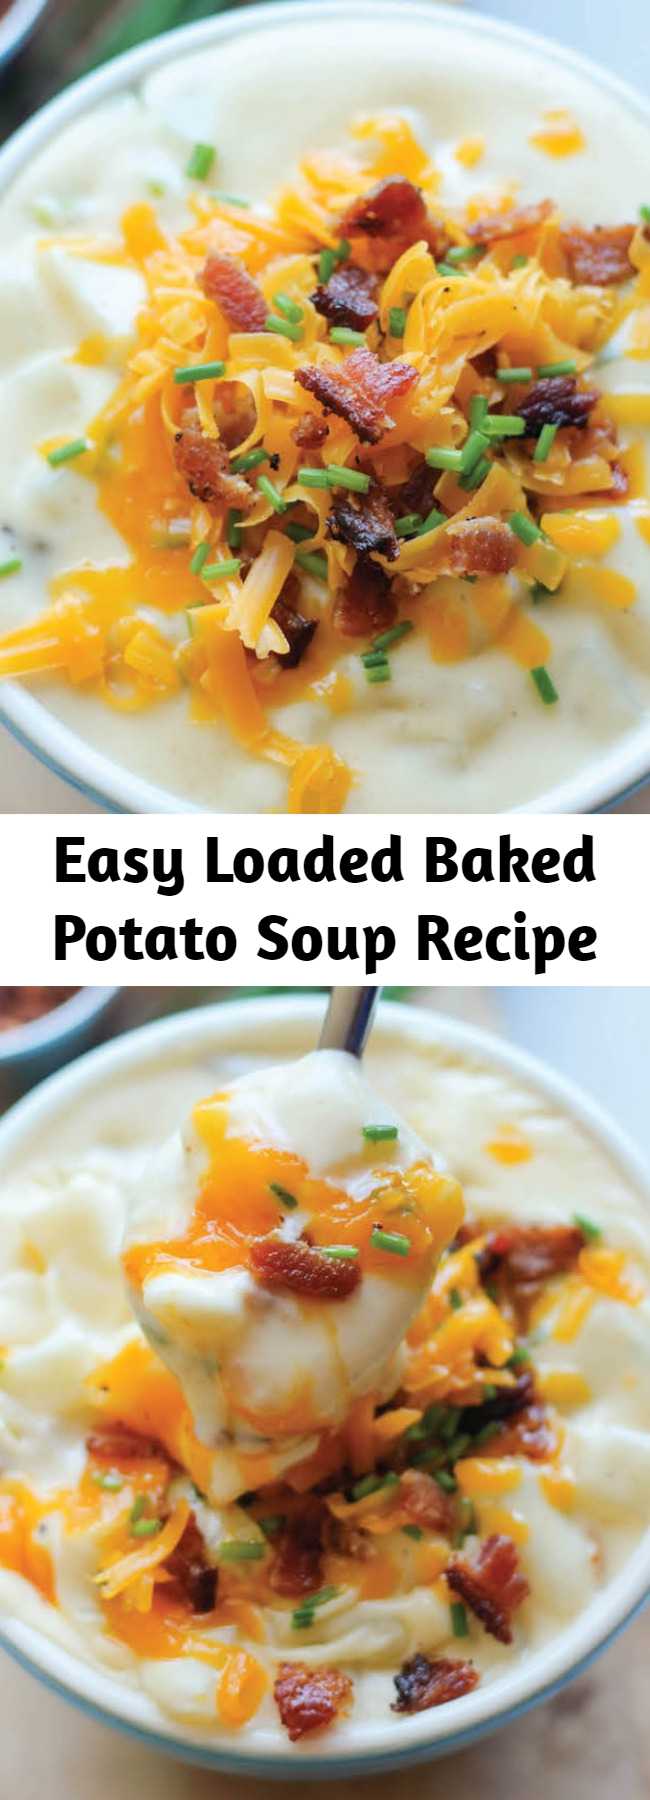 Easy Loaded Baked Potato Soup Recipe - All the flavors of a loaded baked potato comes together beautifully in this satisfyingly creamy and comforting soup!